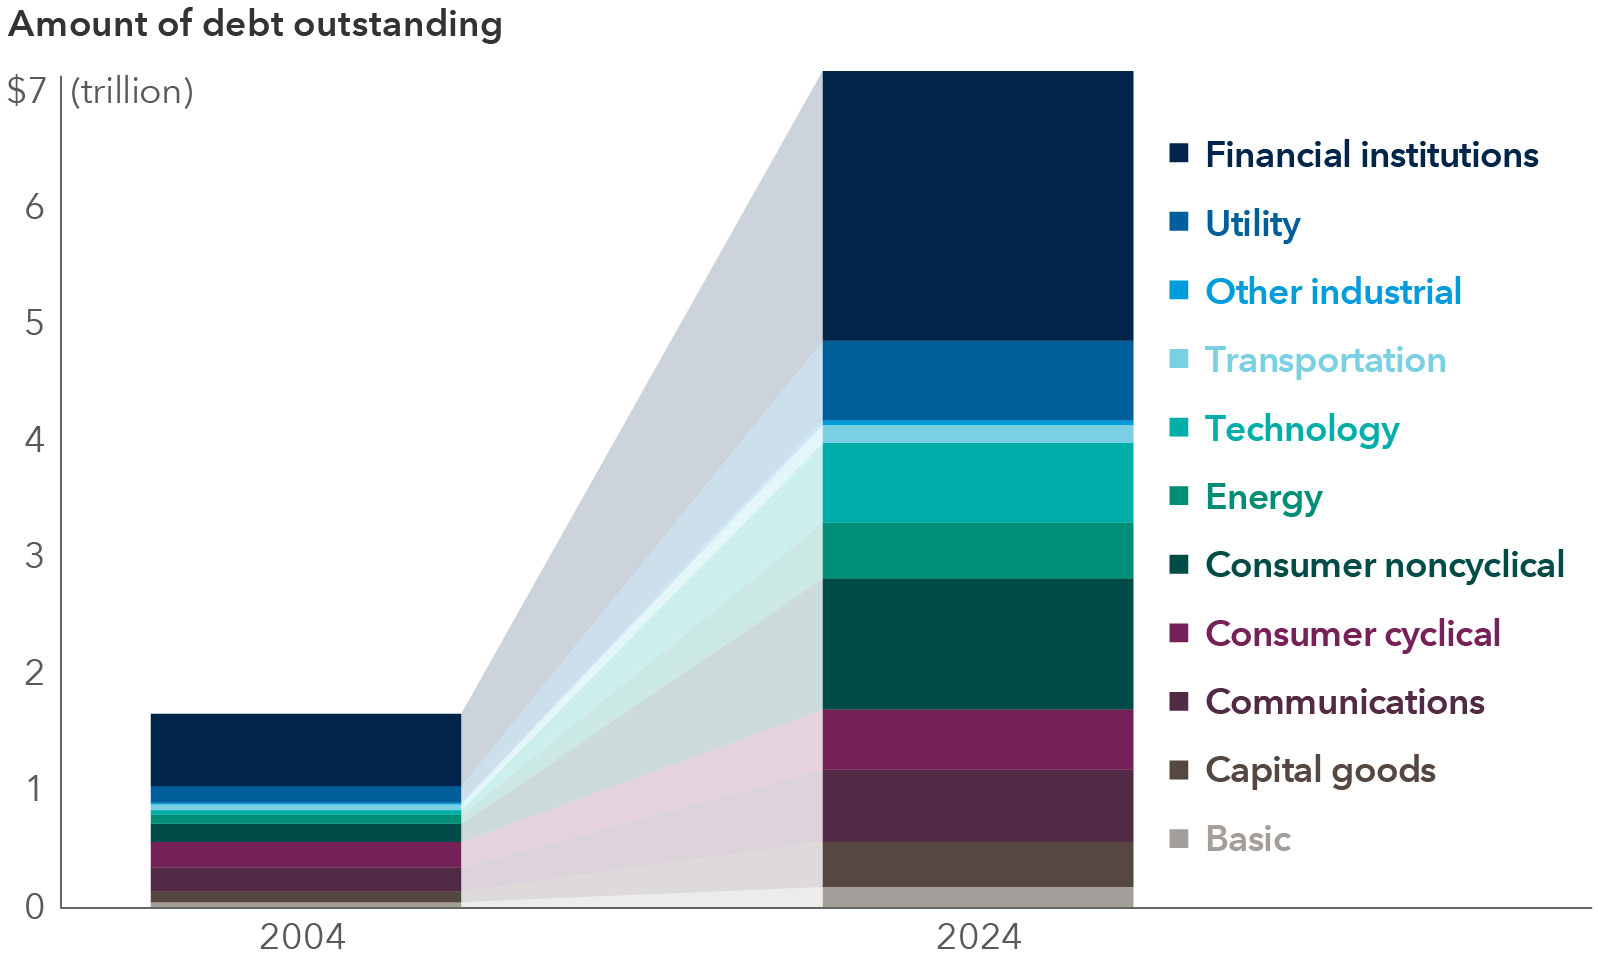 Two stacked bars in the chart above compare the total investment-grade corporate debt outstanding (as represented by the Bloomberg U.S. Corporate Investment Grade Index) in trillions of dollars among various sectors between 2004 and 2024. The vertical bars show a stark contrast in the two decades that separate them. In 2004, the amount outstanding among all sectors totaled less than $2 trillion. Most sectors like basic, capital goods, communications, and others show less than $100 billion, with the notable exception of financial institutions, which made up about $500 billion. By 2024, there’s a significant increase, especially in financial institutions and consumer noncyclical goods. The total amount surpasses $7 trillion and shows substantial growth in debt among all sectors, including basic, capital goods, communications, consumer cyclical goods, energy, technology, transportation, other industrial and utilities over the twenty-year span. The y-axis is marked in increments of $1 trillion.